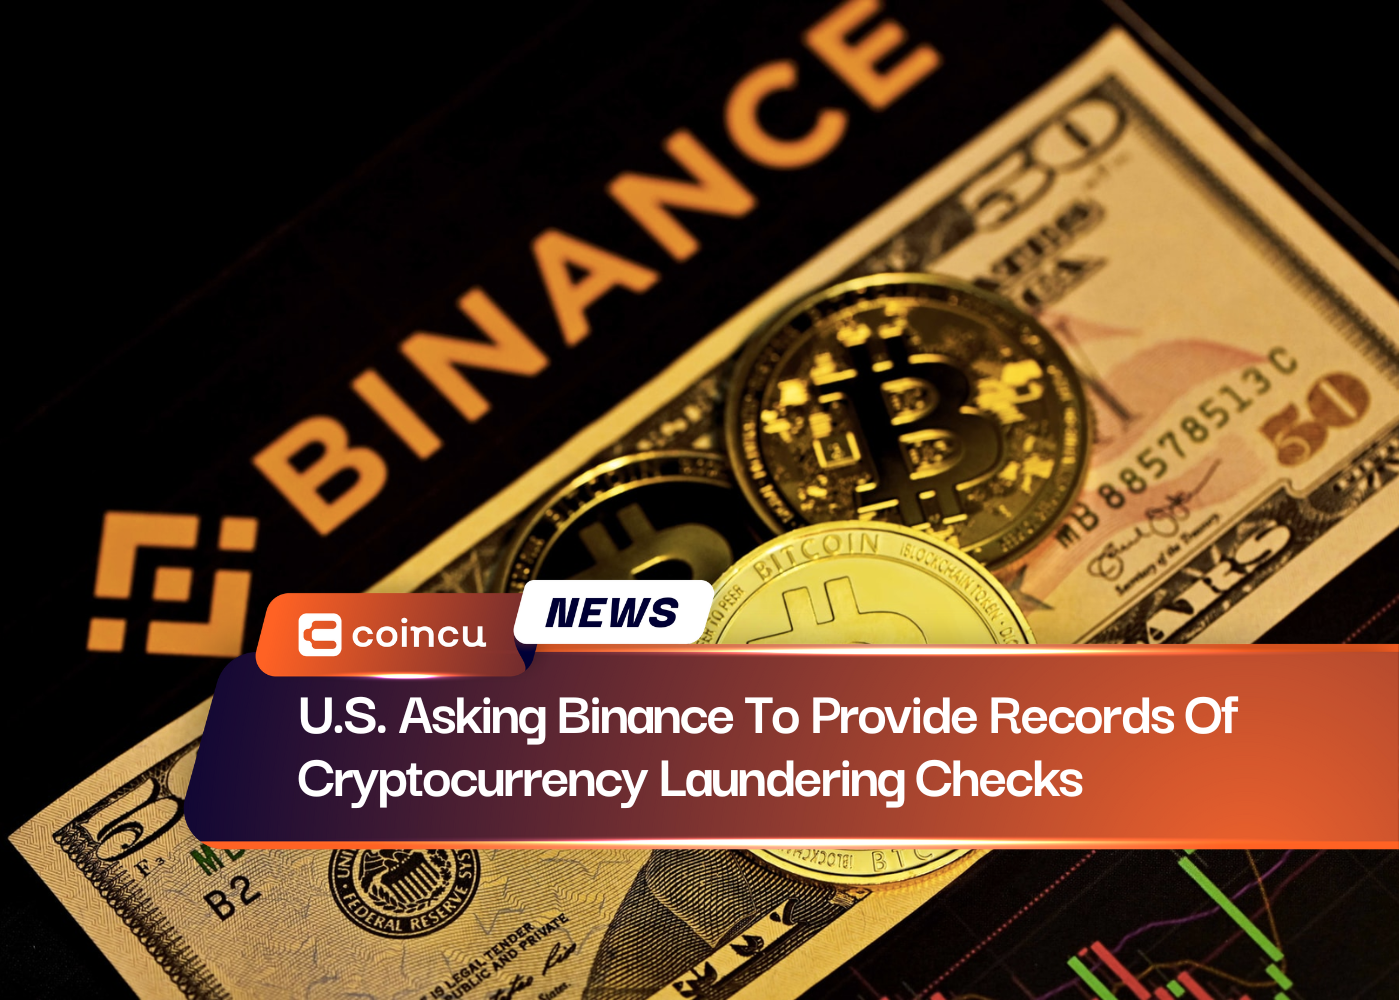 U.S. Asking Binance To Provide Records Of Cryptocurrency Laundering Checks